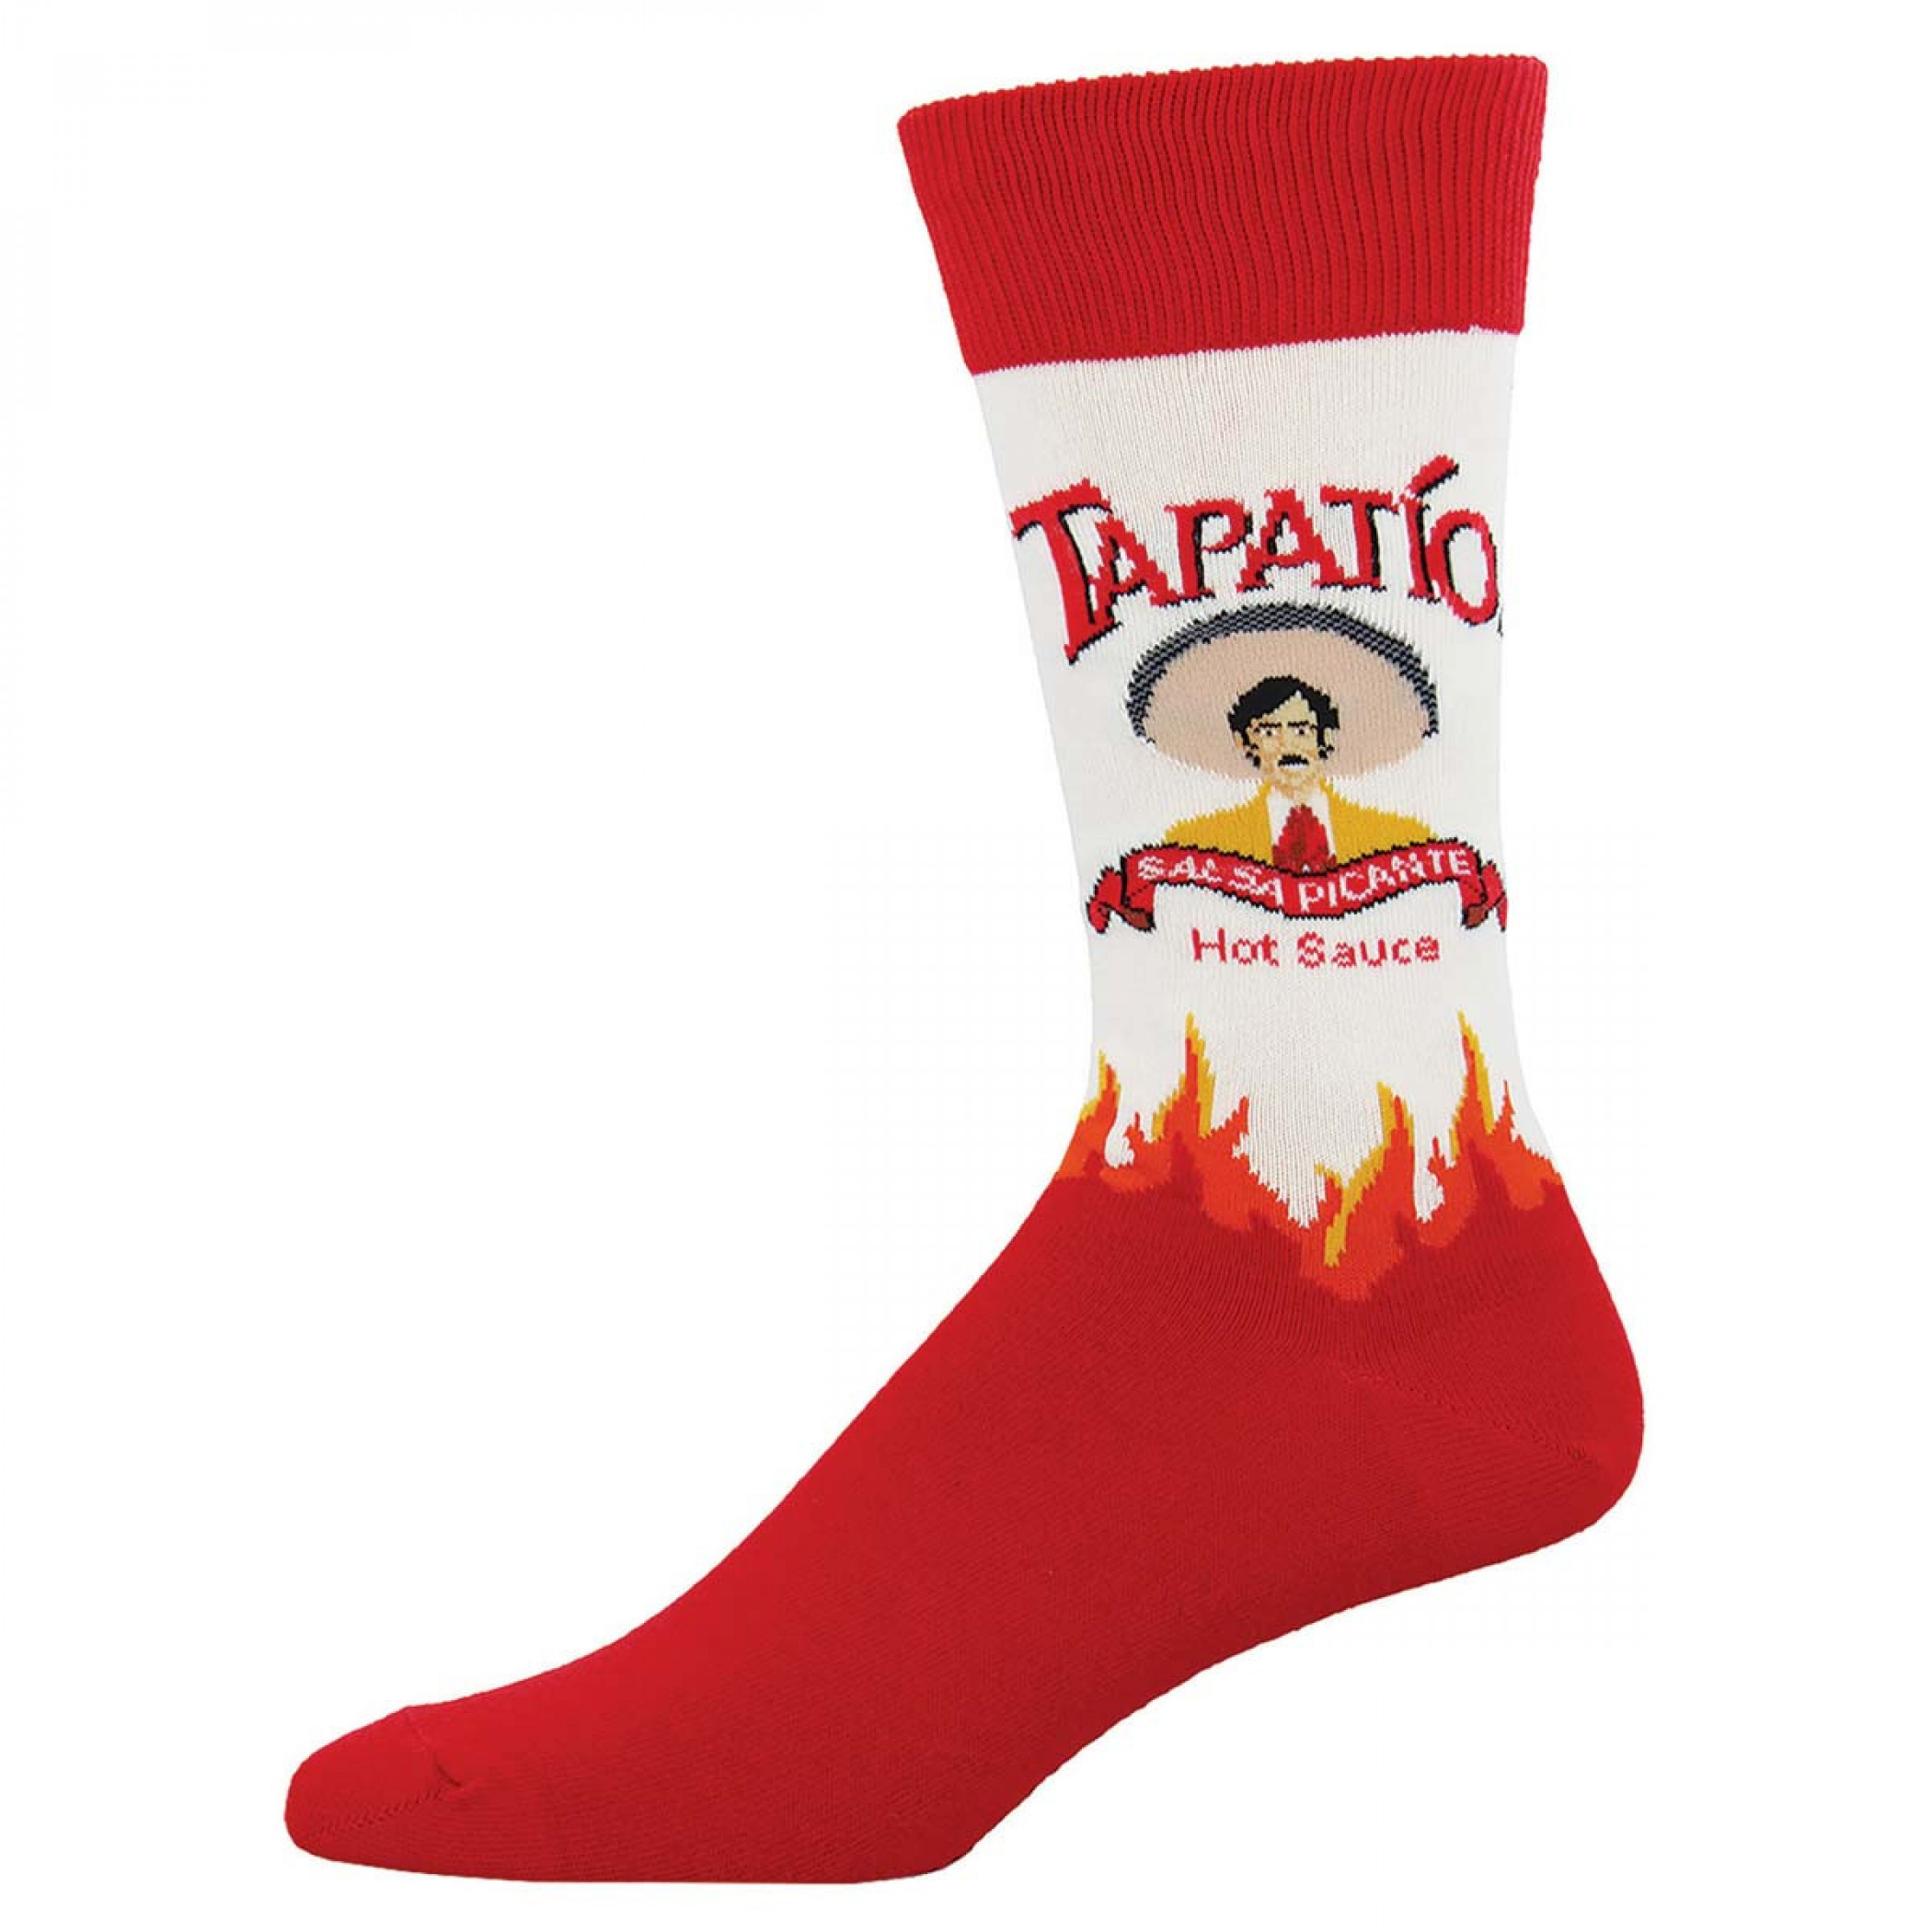 Tapatio Hot Sauce Red Socks